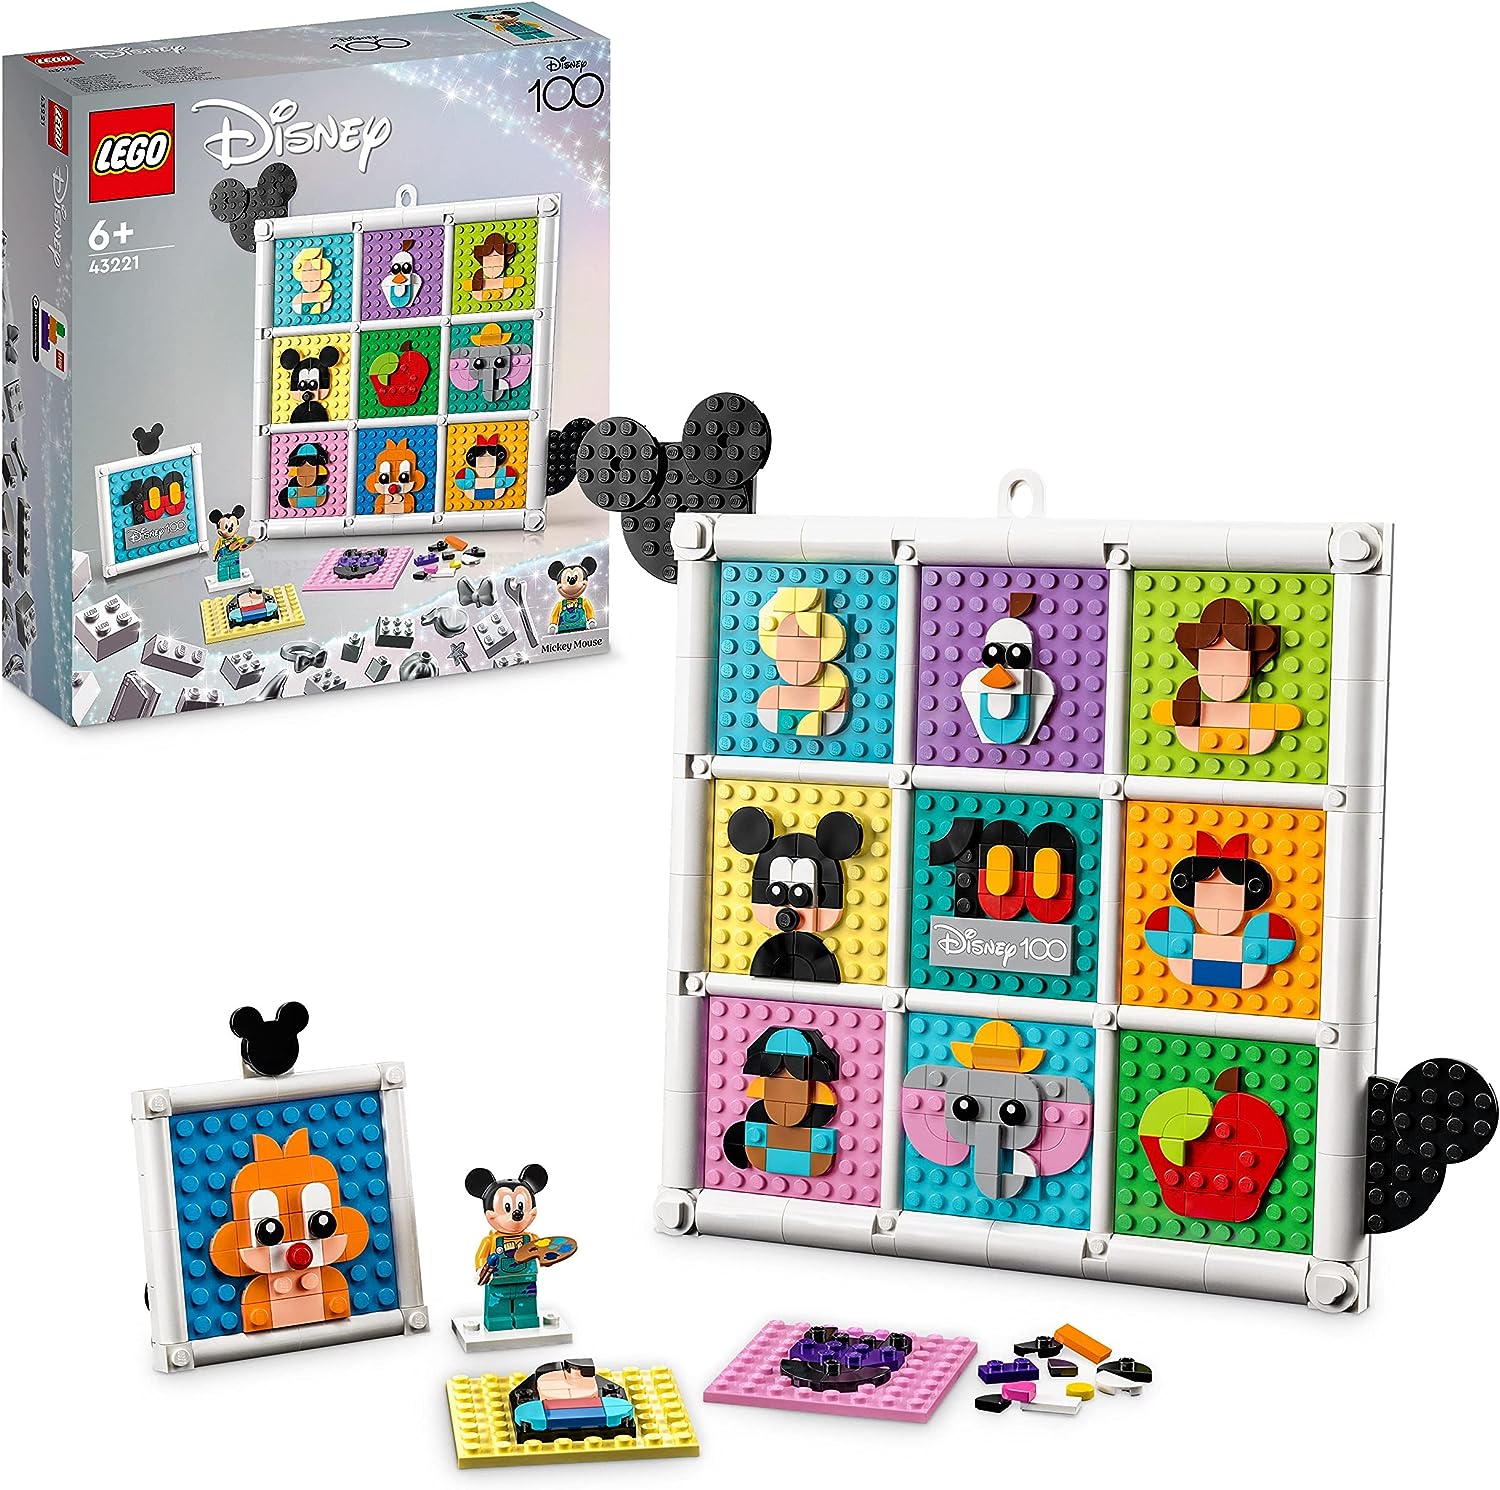 LEGO 43221 Disney 100 Years Disney Cartoon Icons, Craft Set and DIY Set as Wall Art and Bedroom Accessories, with Mickey Mouse etc.